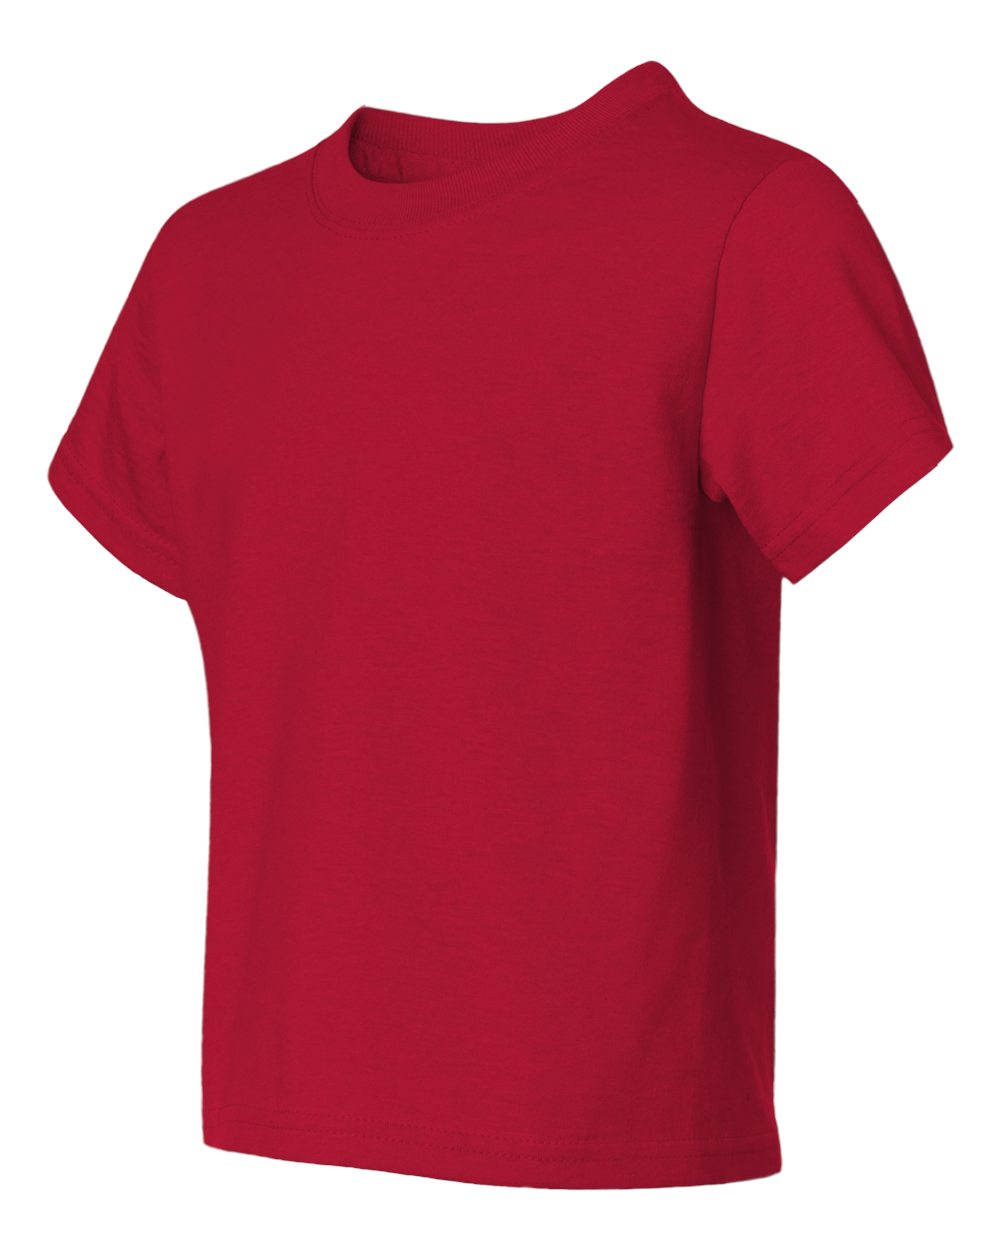 JERZEES Dri-Power® Youth 50/50 T-Shirt 29BR #color_True Red